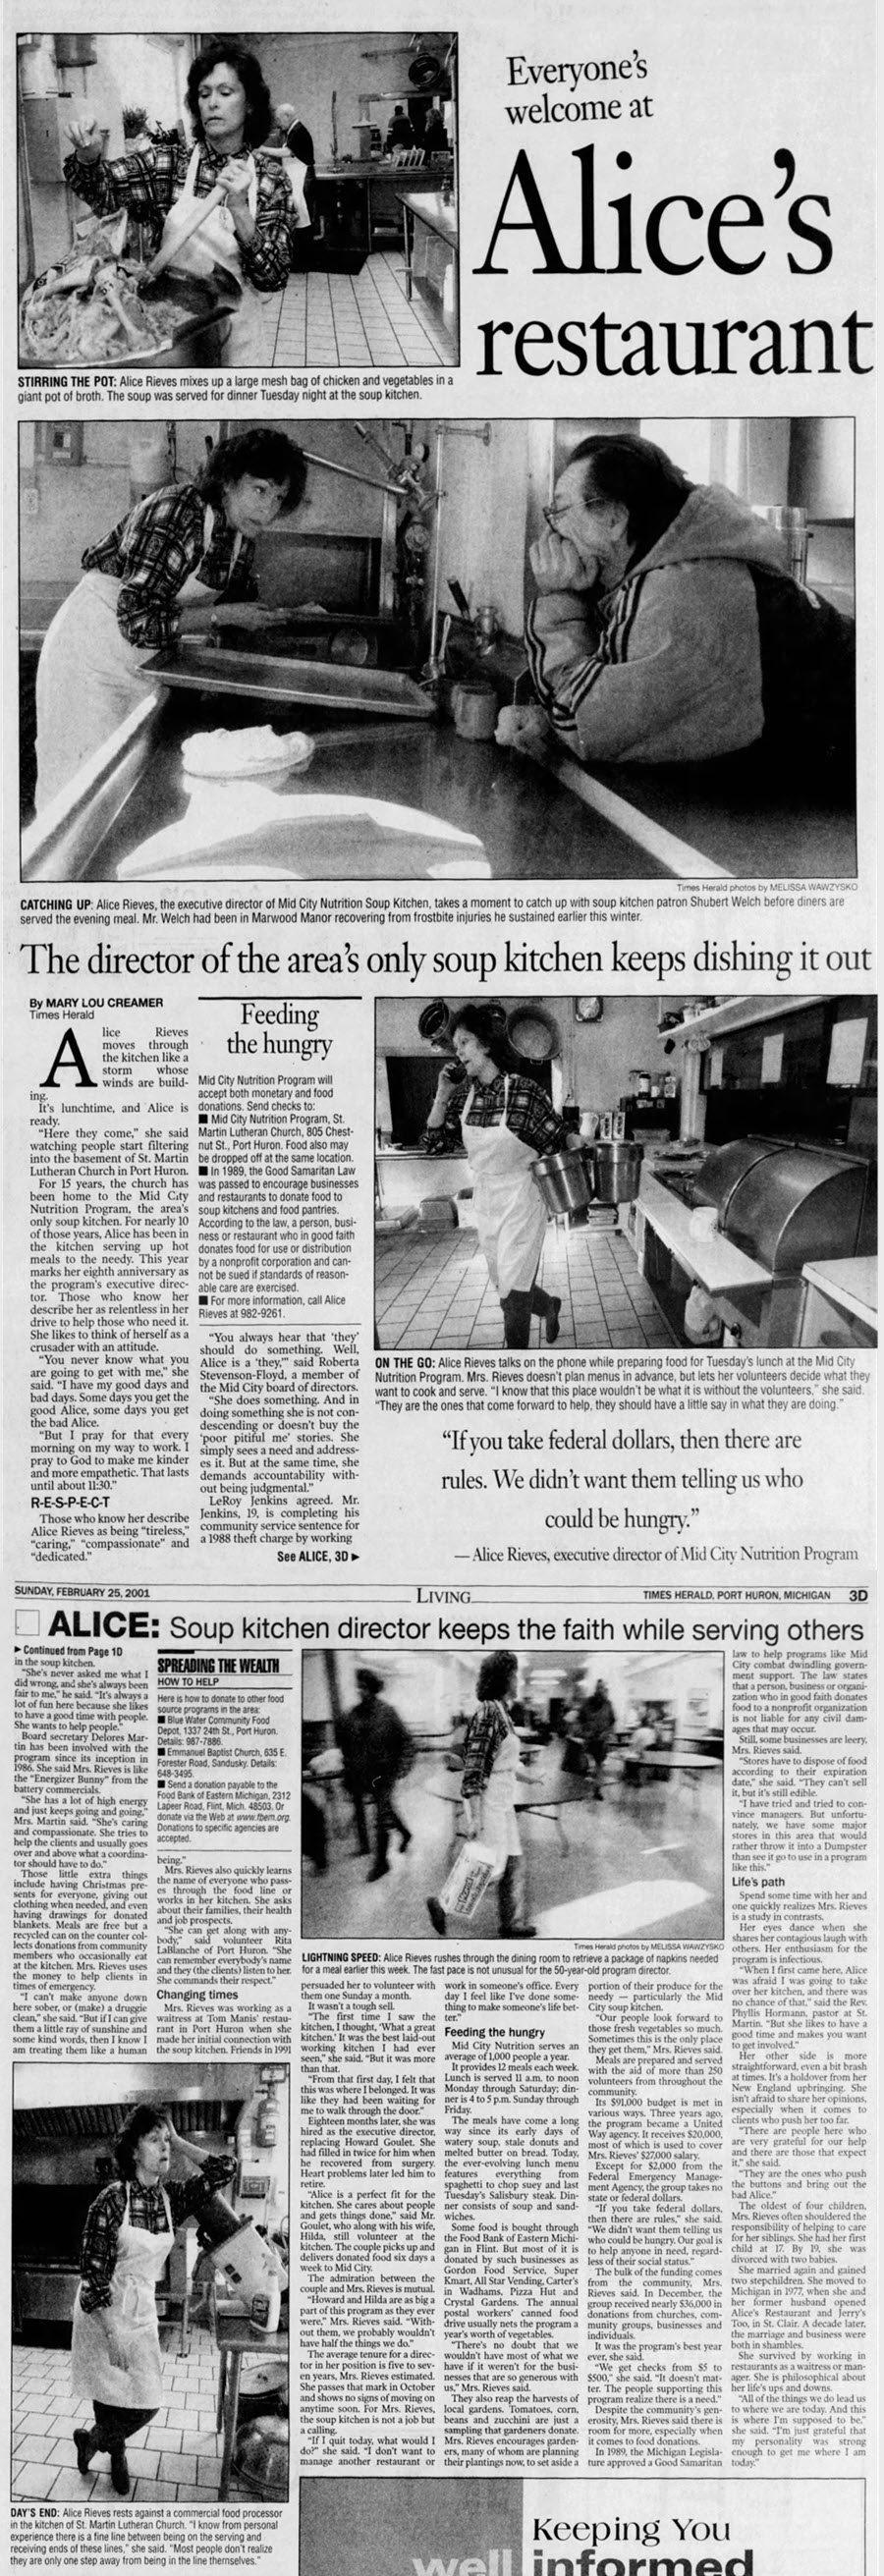 Alices Restaurant - Feb 2001 Profile Article (newer photo)